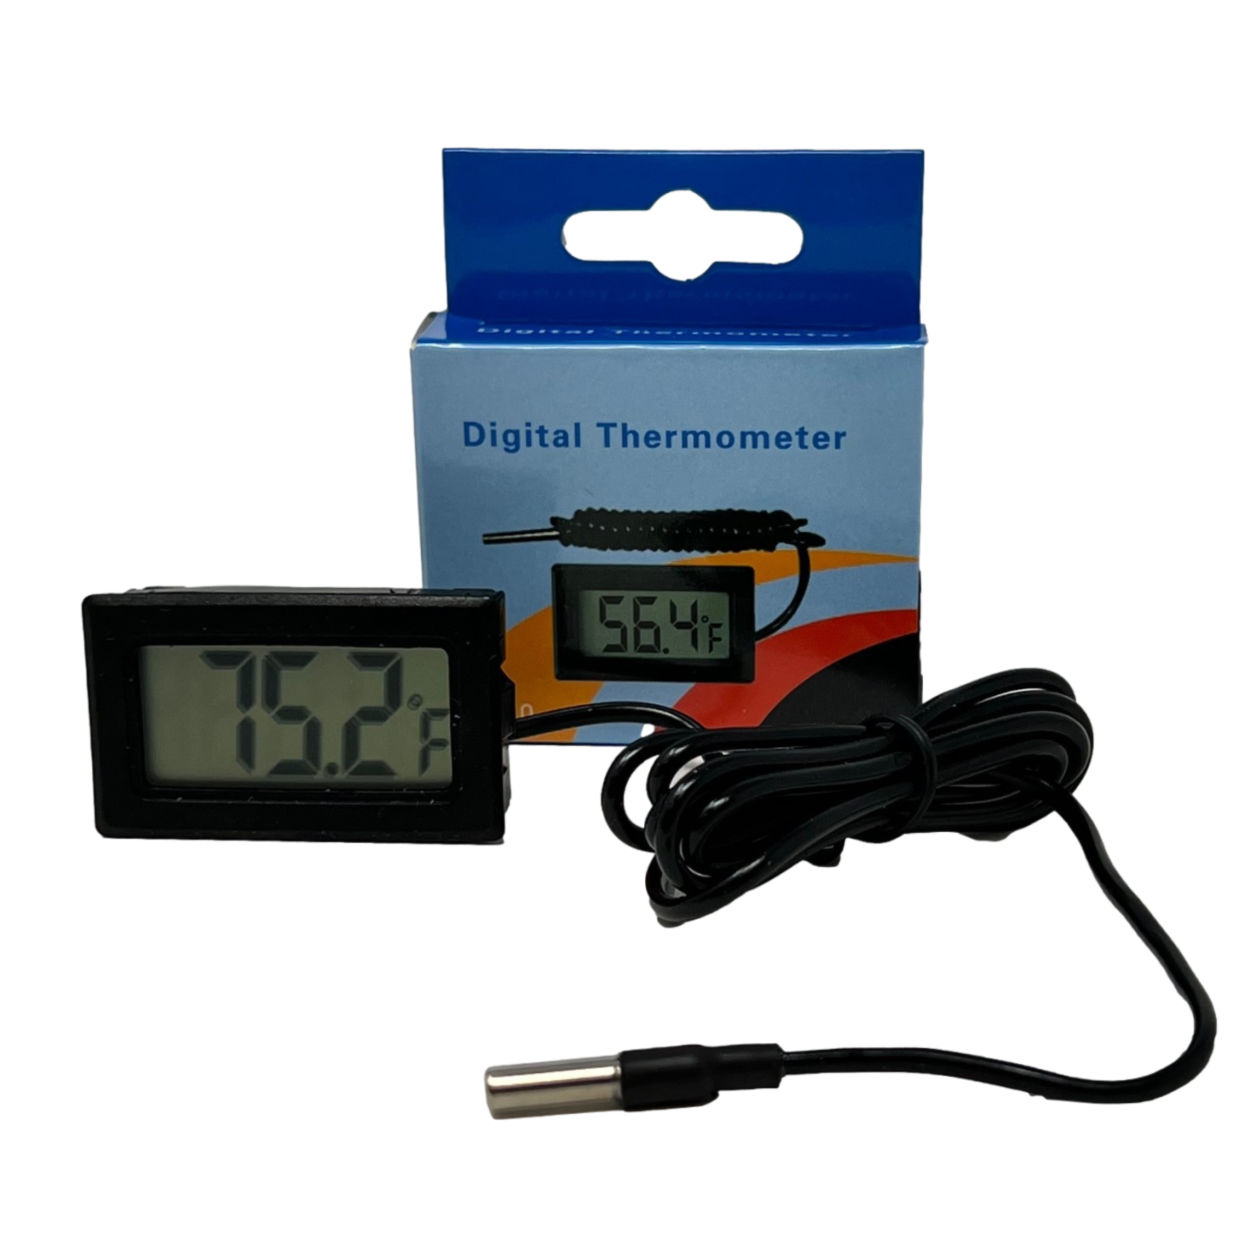  Meat Thermometer Probe Water Thermometer Long Probe